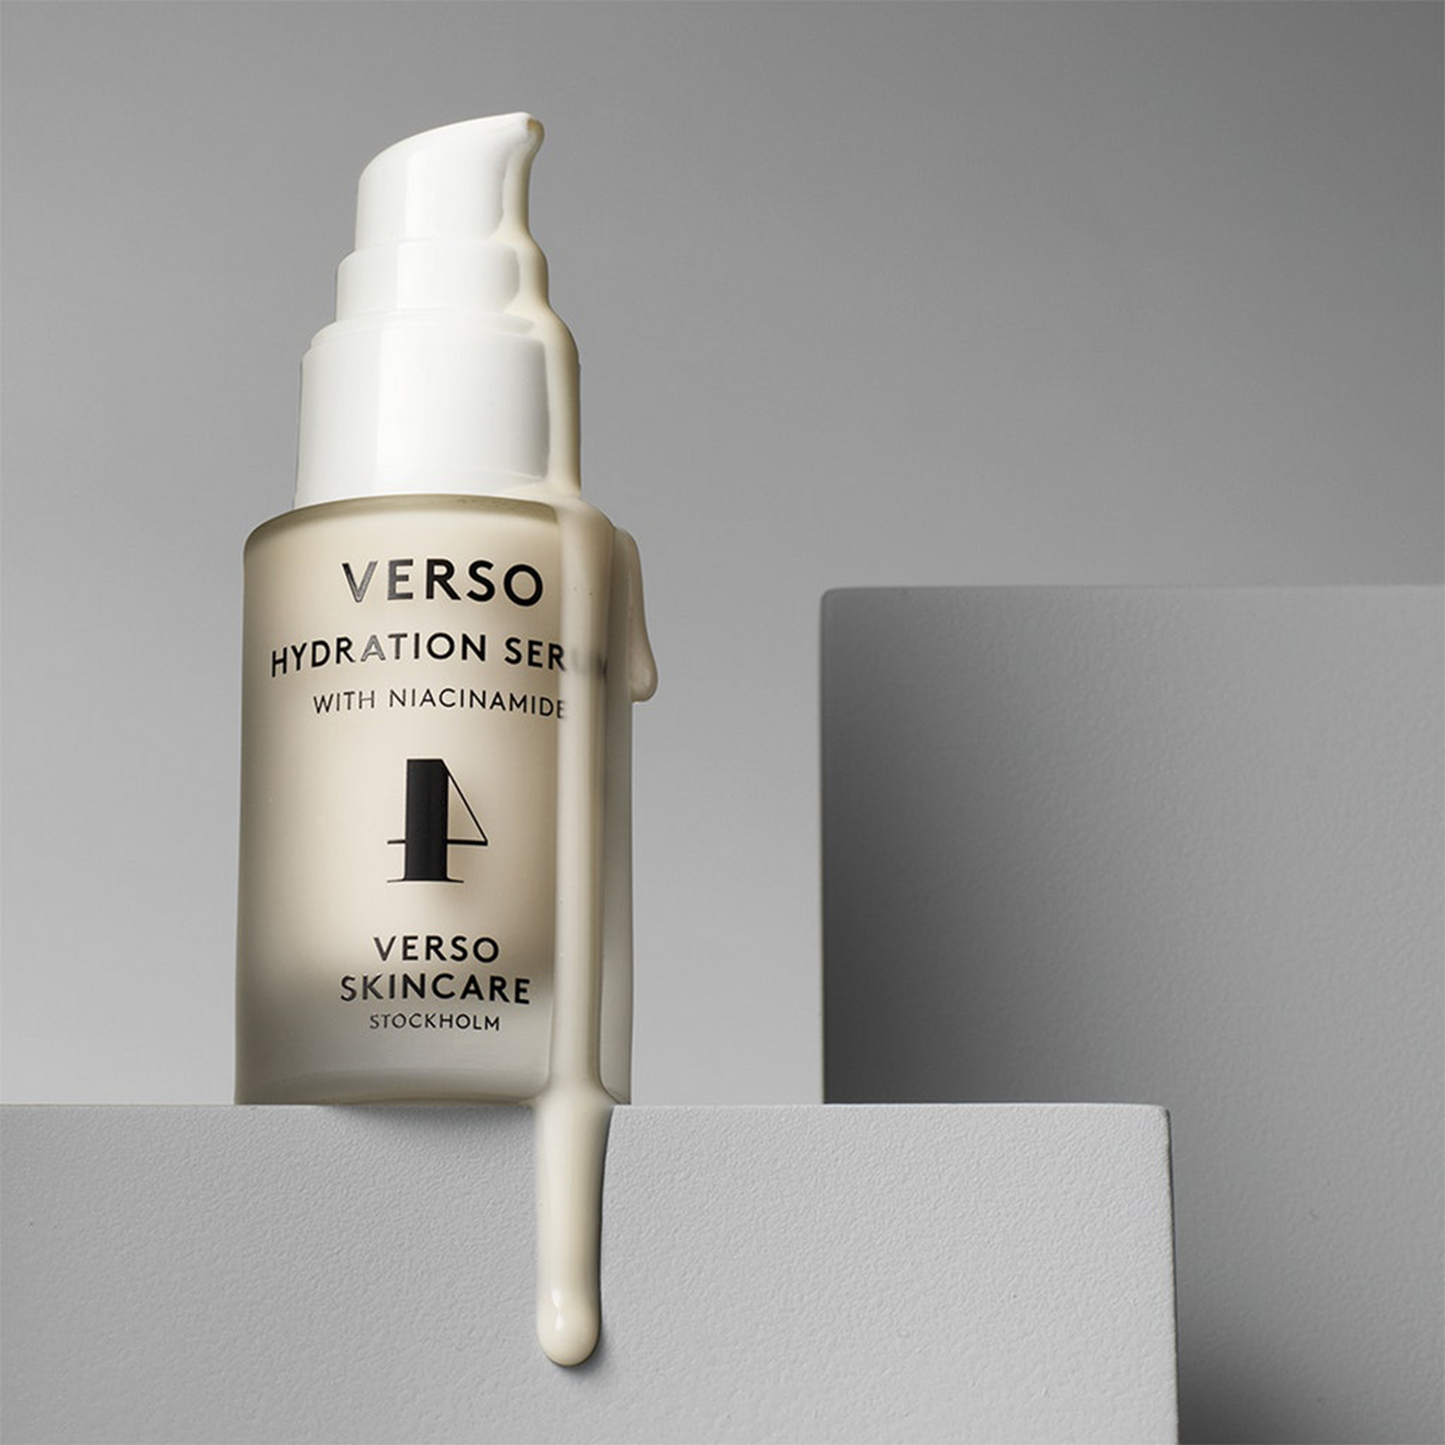 Verso Hydration Serum: Effectively working against unnecessary dryness, this serum keeps the skin looking smooth and soft. It balances the skin and minimizes the appearance of fine lines, enlarged pores, and discoloration. The result is a smoother texture, improved tone and younger-looking skin. Perfume-free.